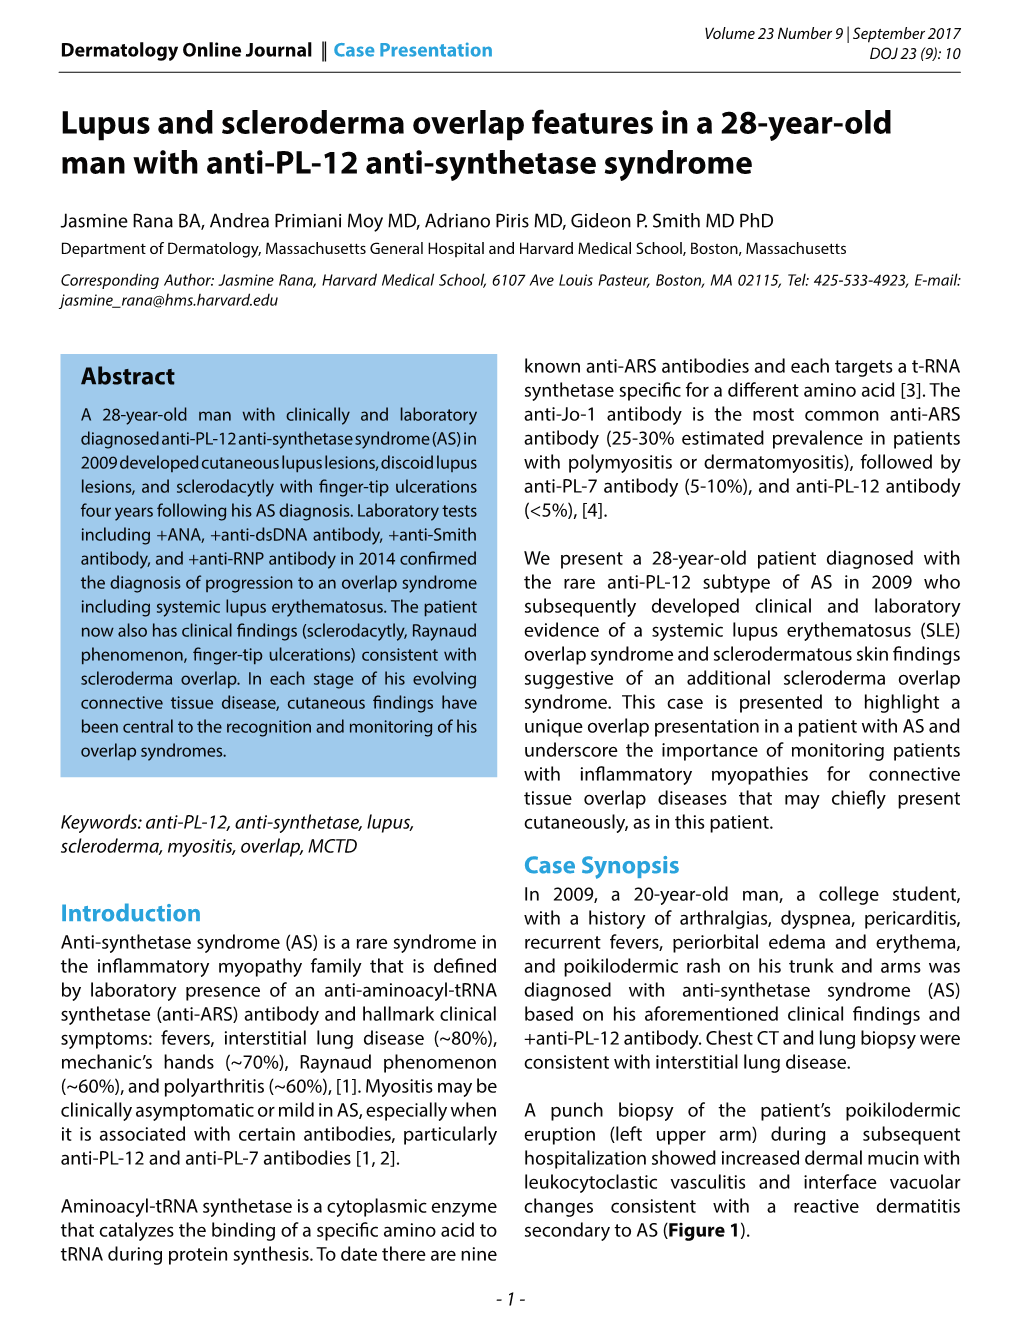 Lupus and Scleroderma Overlap Features in a 28-Year-Old Man with Anti-PL-12 Anti-Synthetase Syndrome